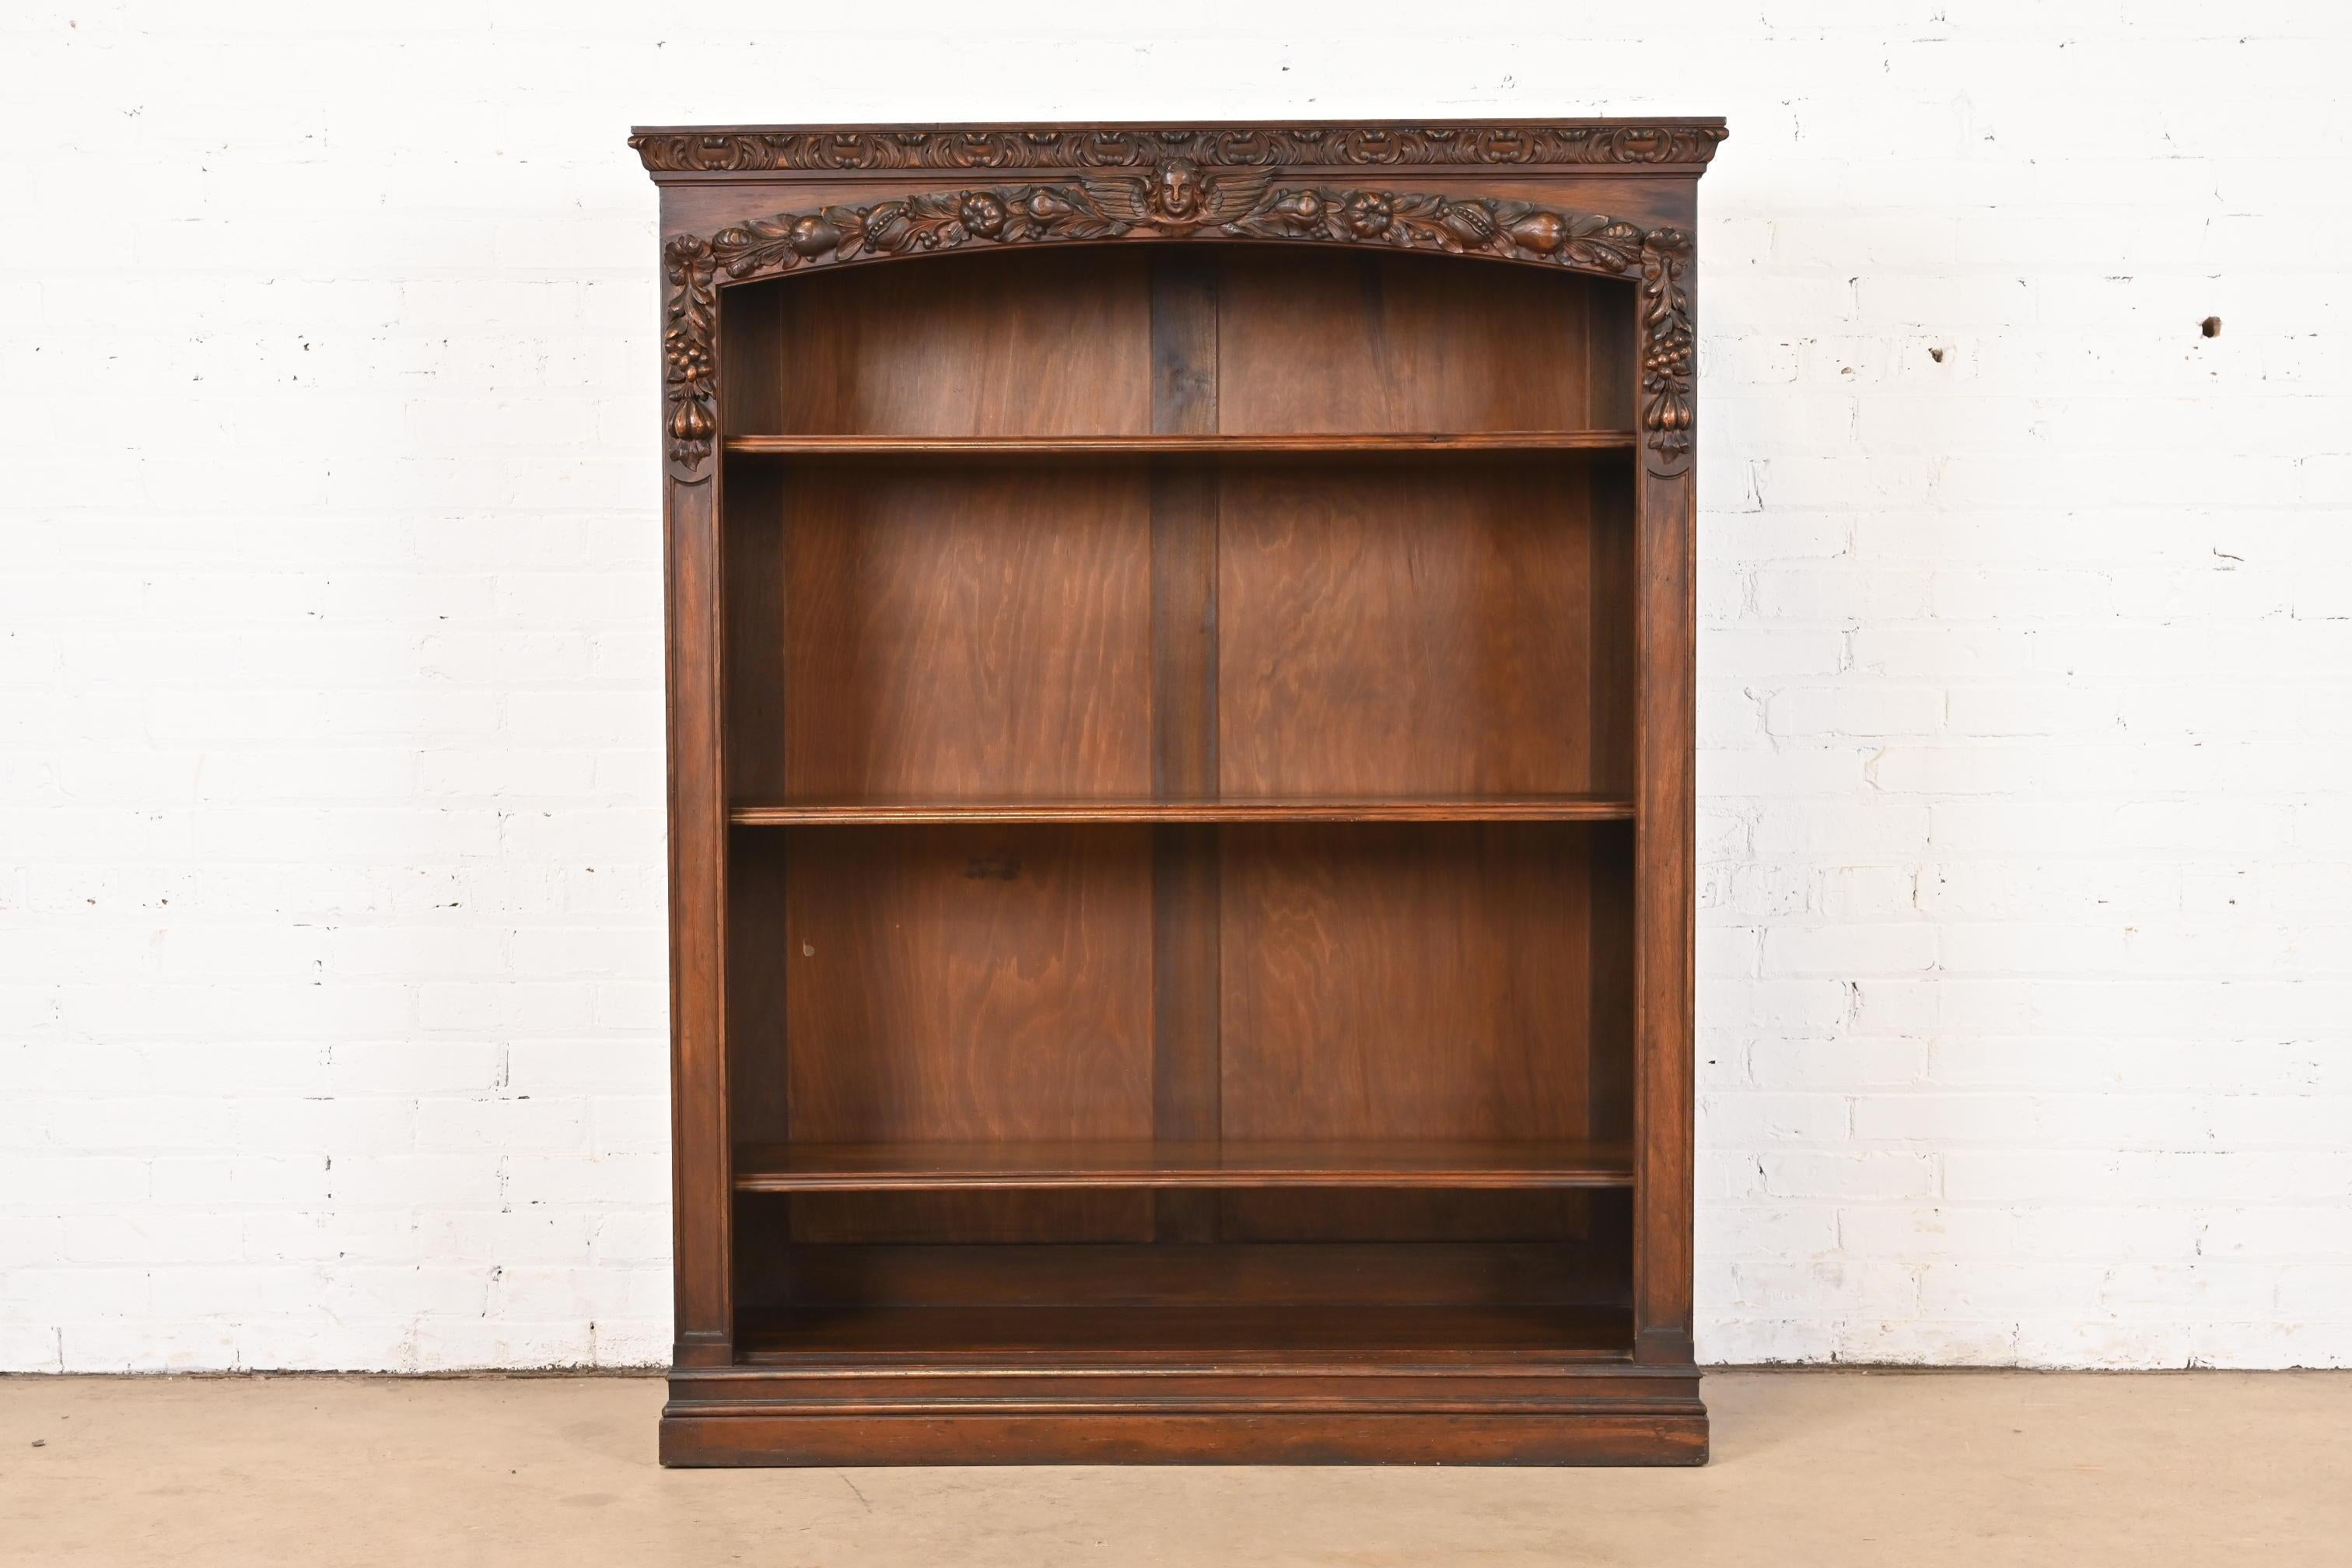 A gorgeous antique Victorian or Renaissance Revival bookcase

In the manner of R.J. Horner

USA, Circa 1890s

Beautiful walnut, with carved angels and fruit.

Measures: 45.25W x 13.25